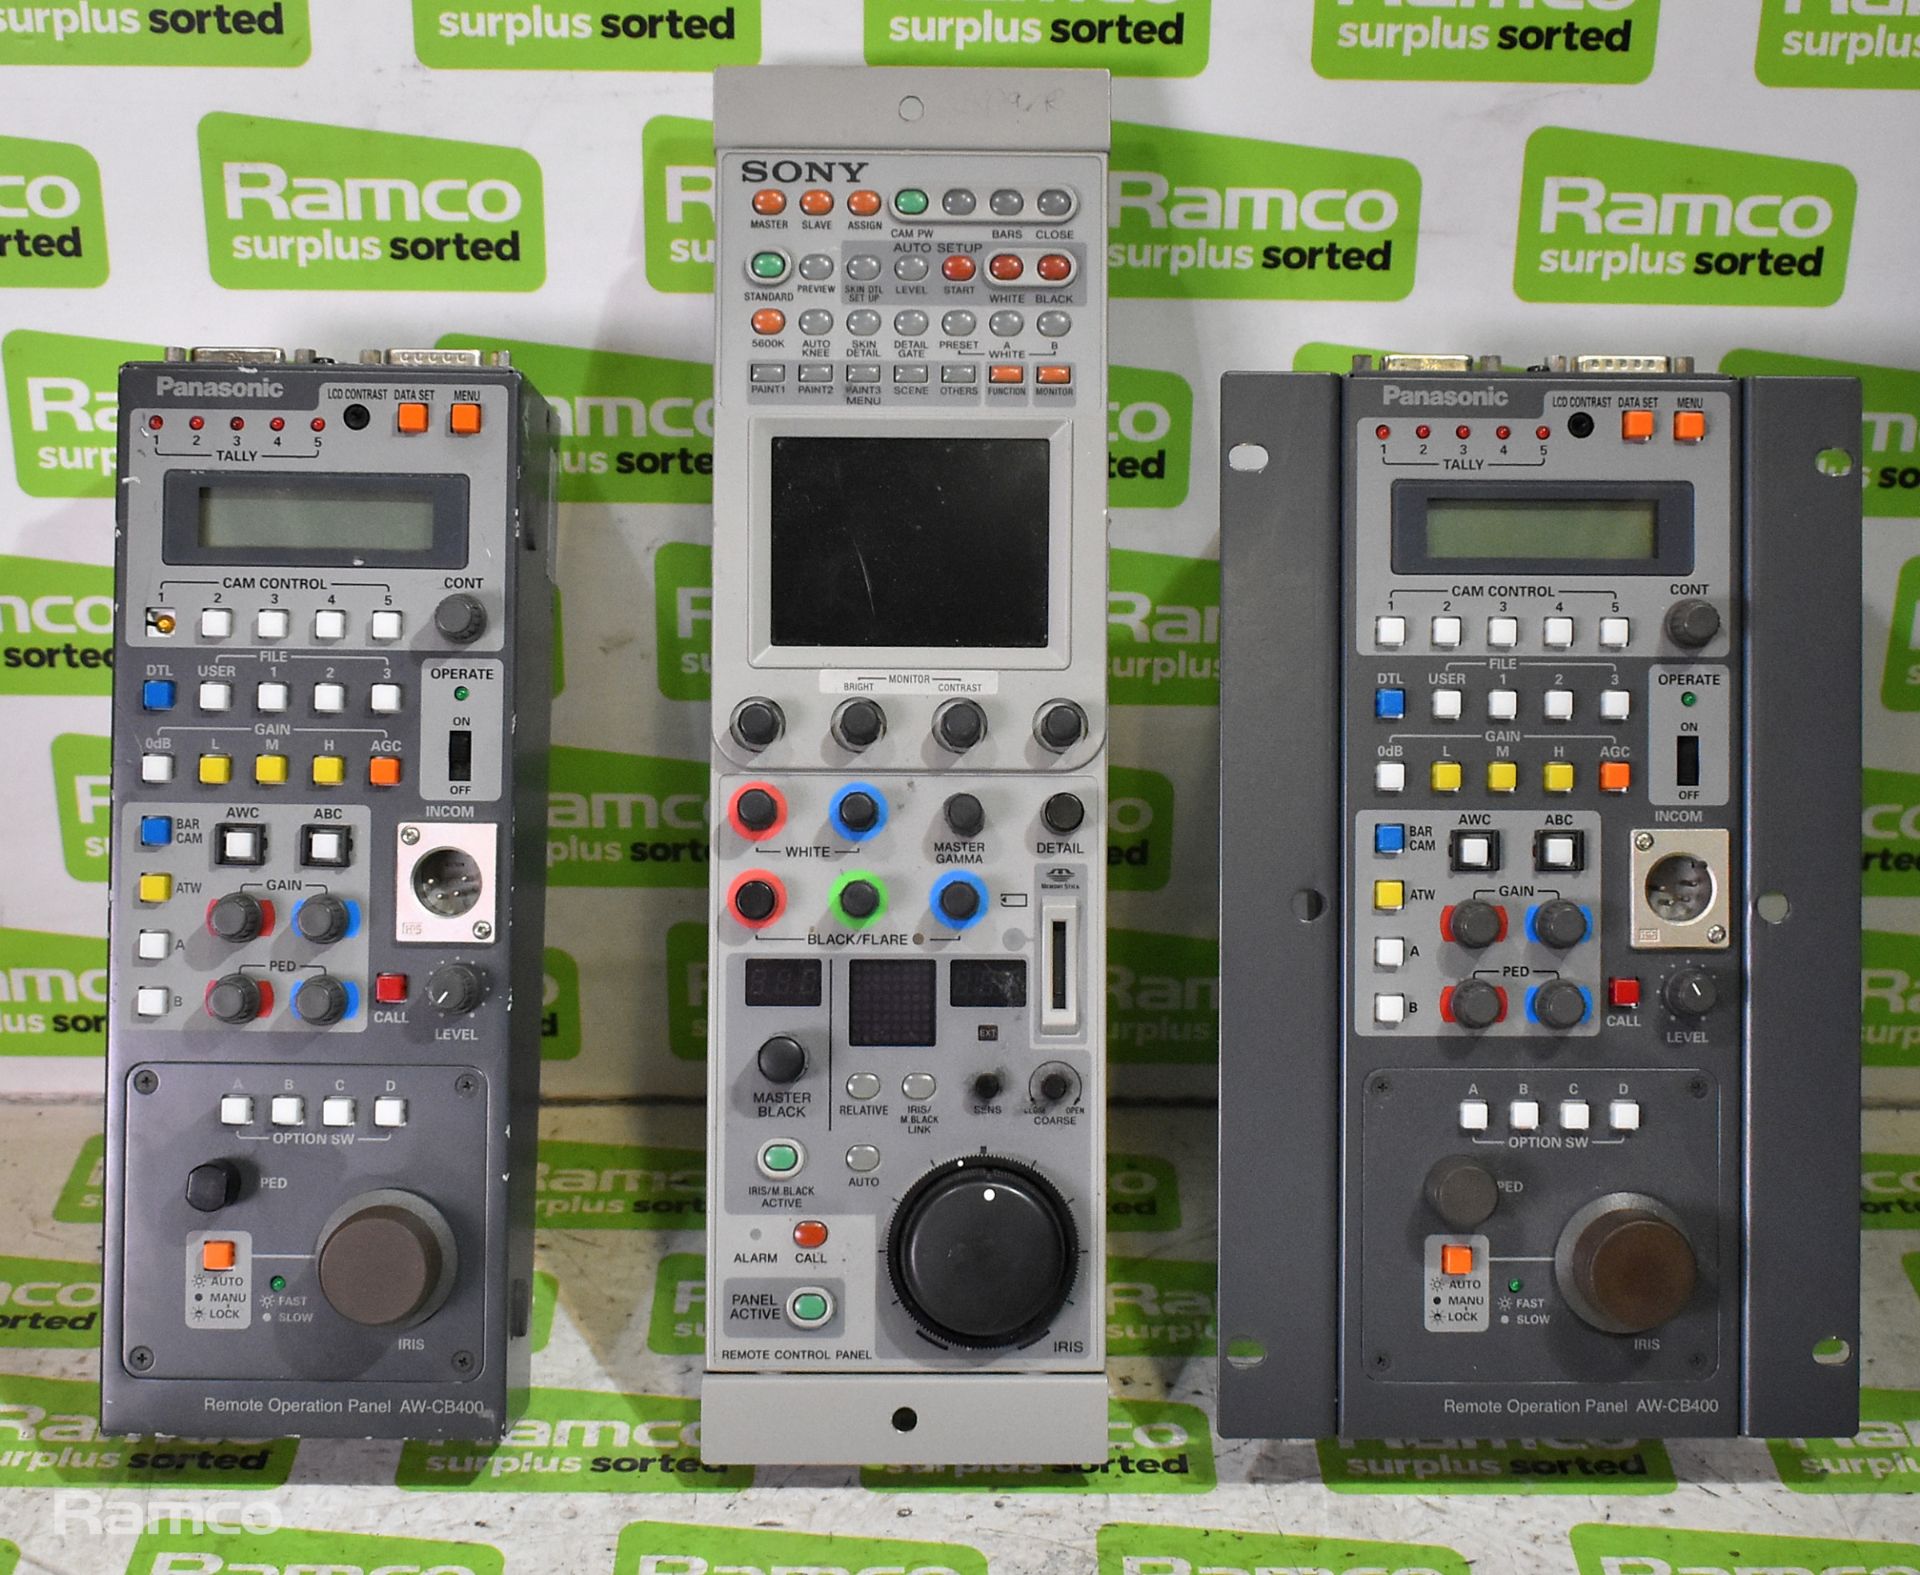 4x Sony RCP-D50 remote control panels, Sony RCP-D51 remote control panel, 2x Sony RCP-750 units - Image 8 of 15